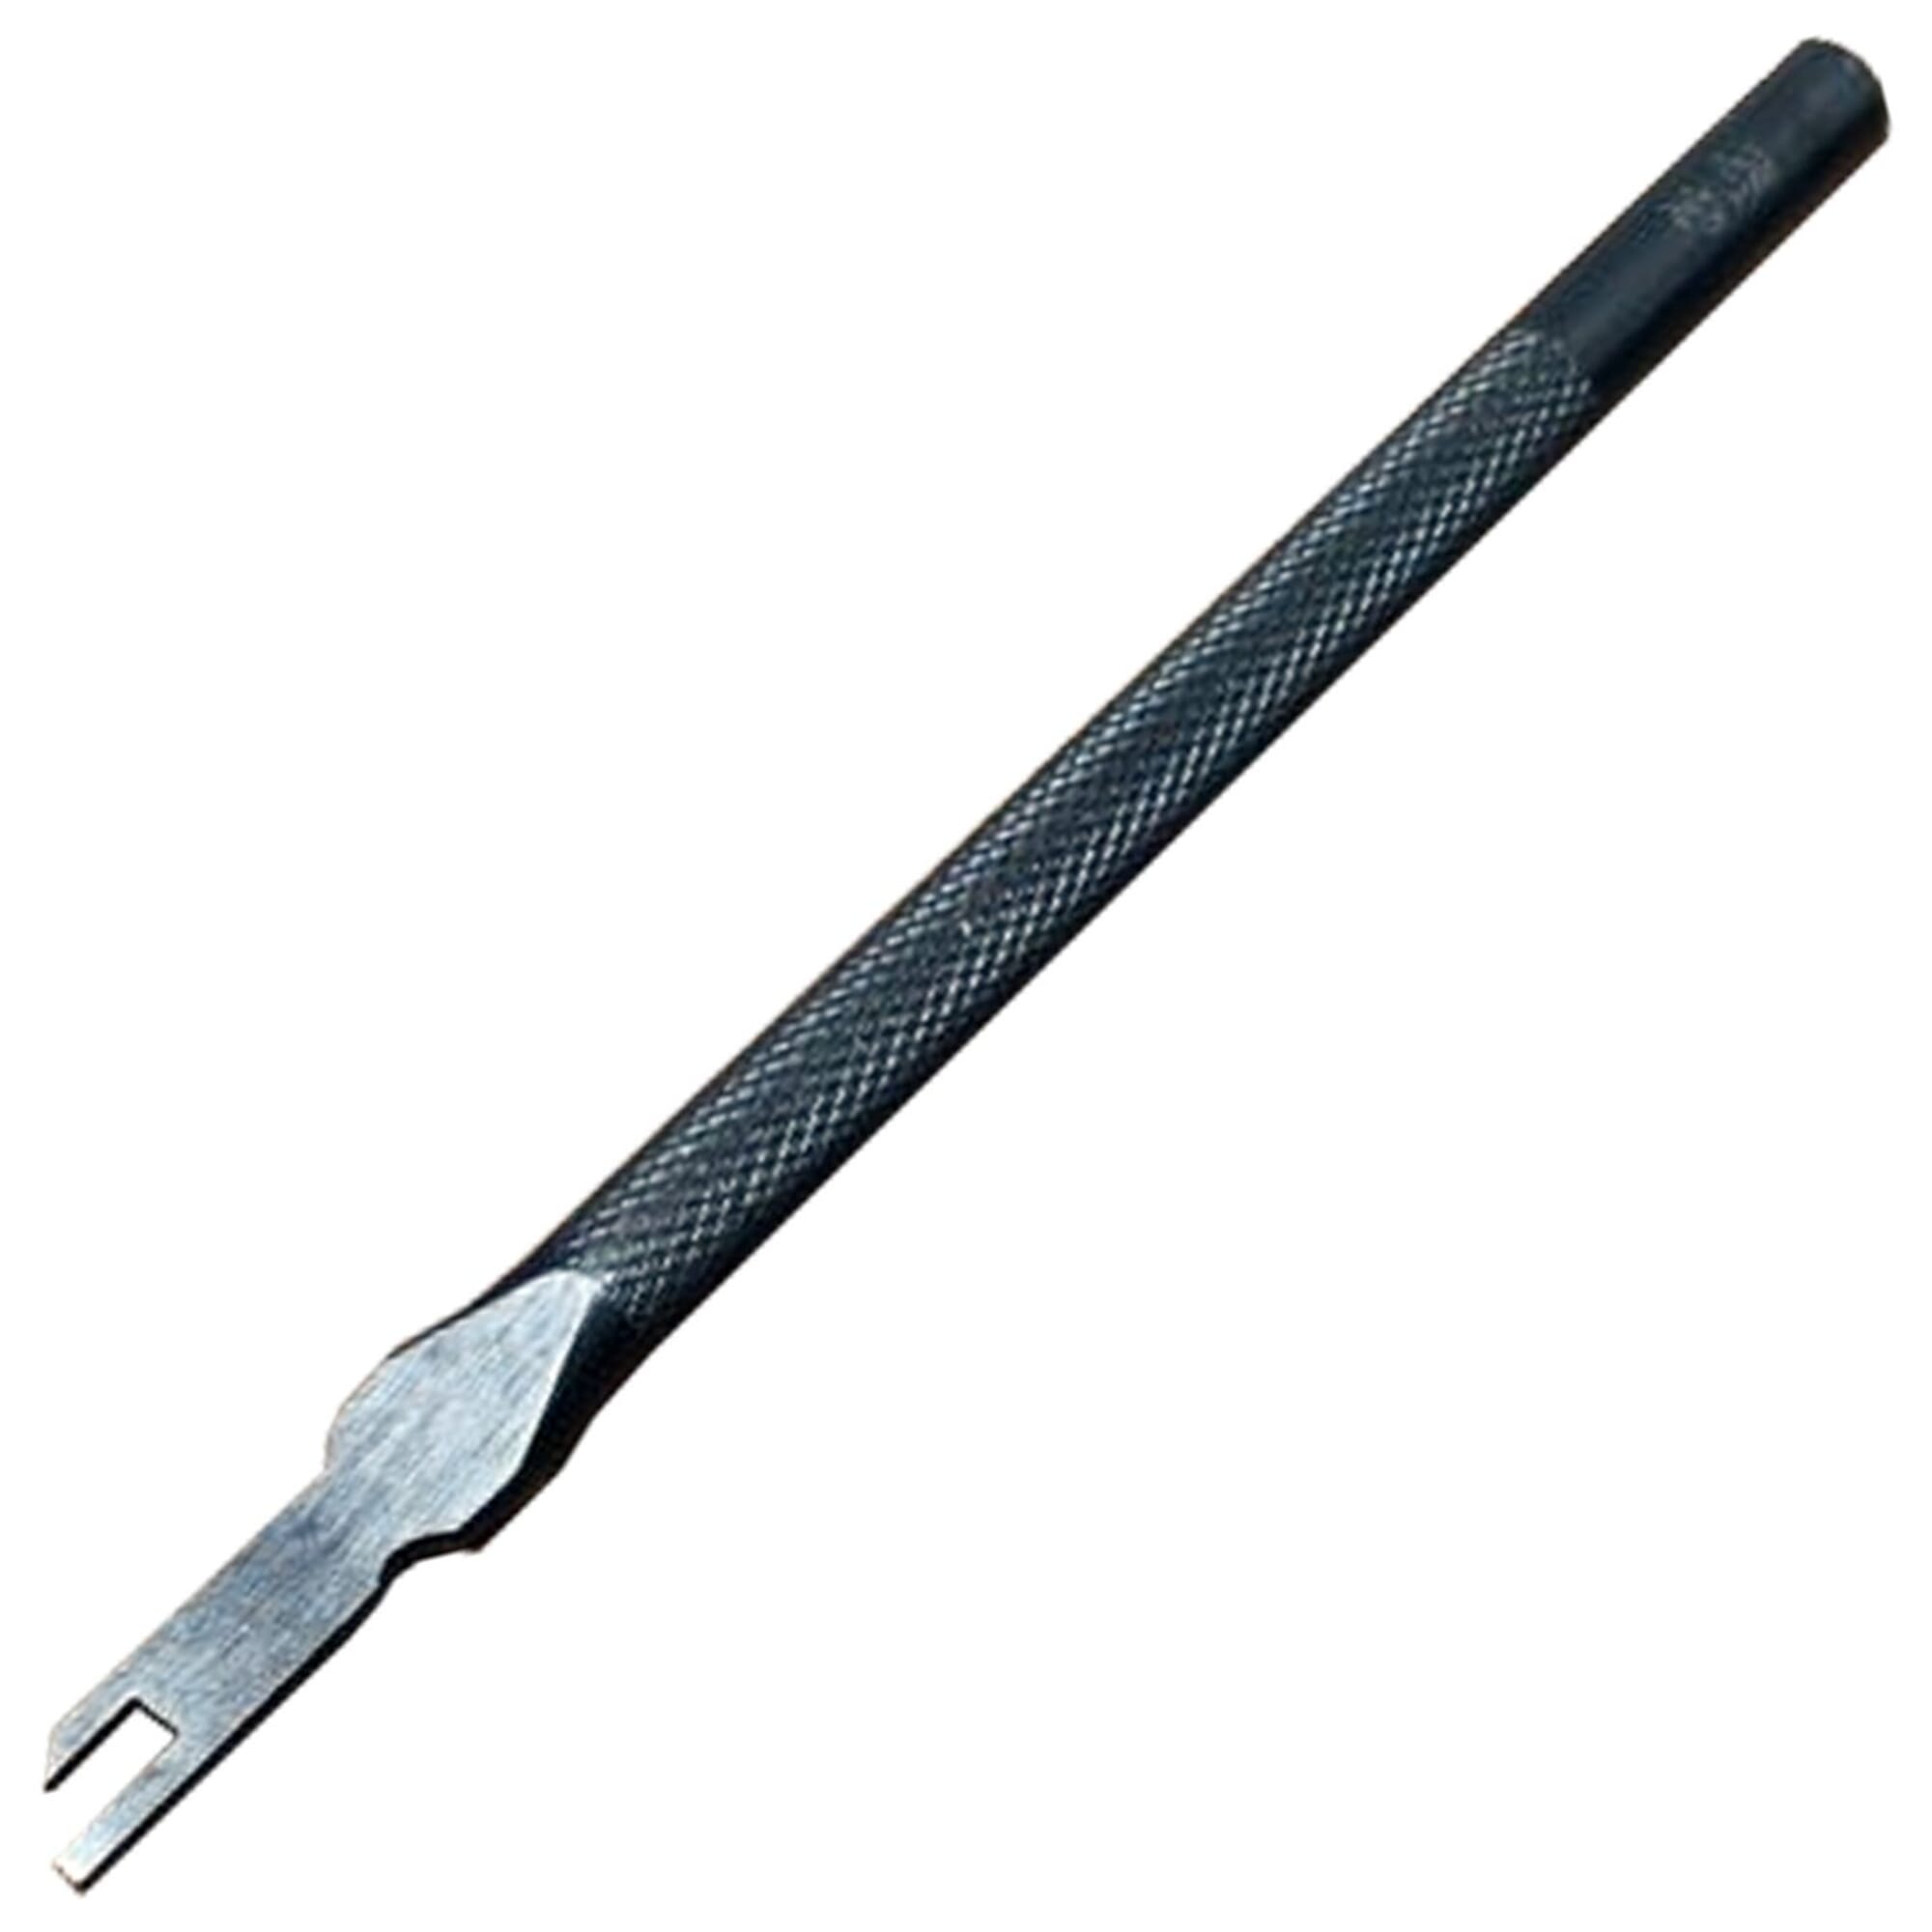 Leather Tools. bevelers, burnishers, cutters, gouges, glues, groovers,  mauls, pricking irons, punches, skivers, - Purchase online from our  Internet store